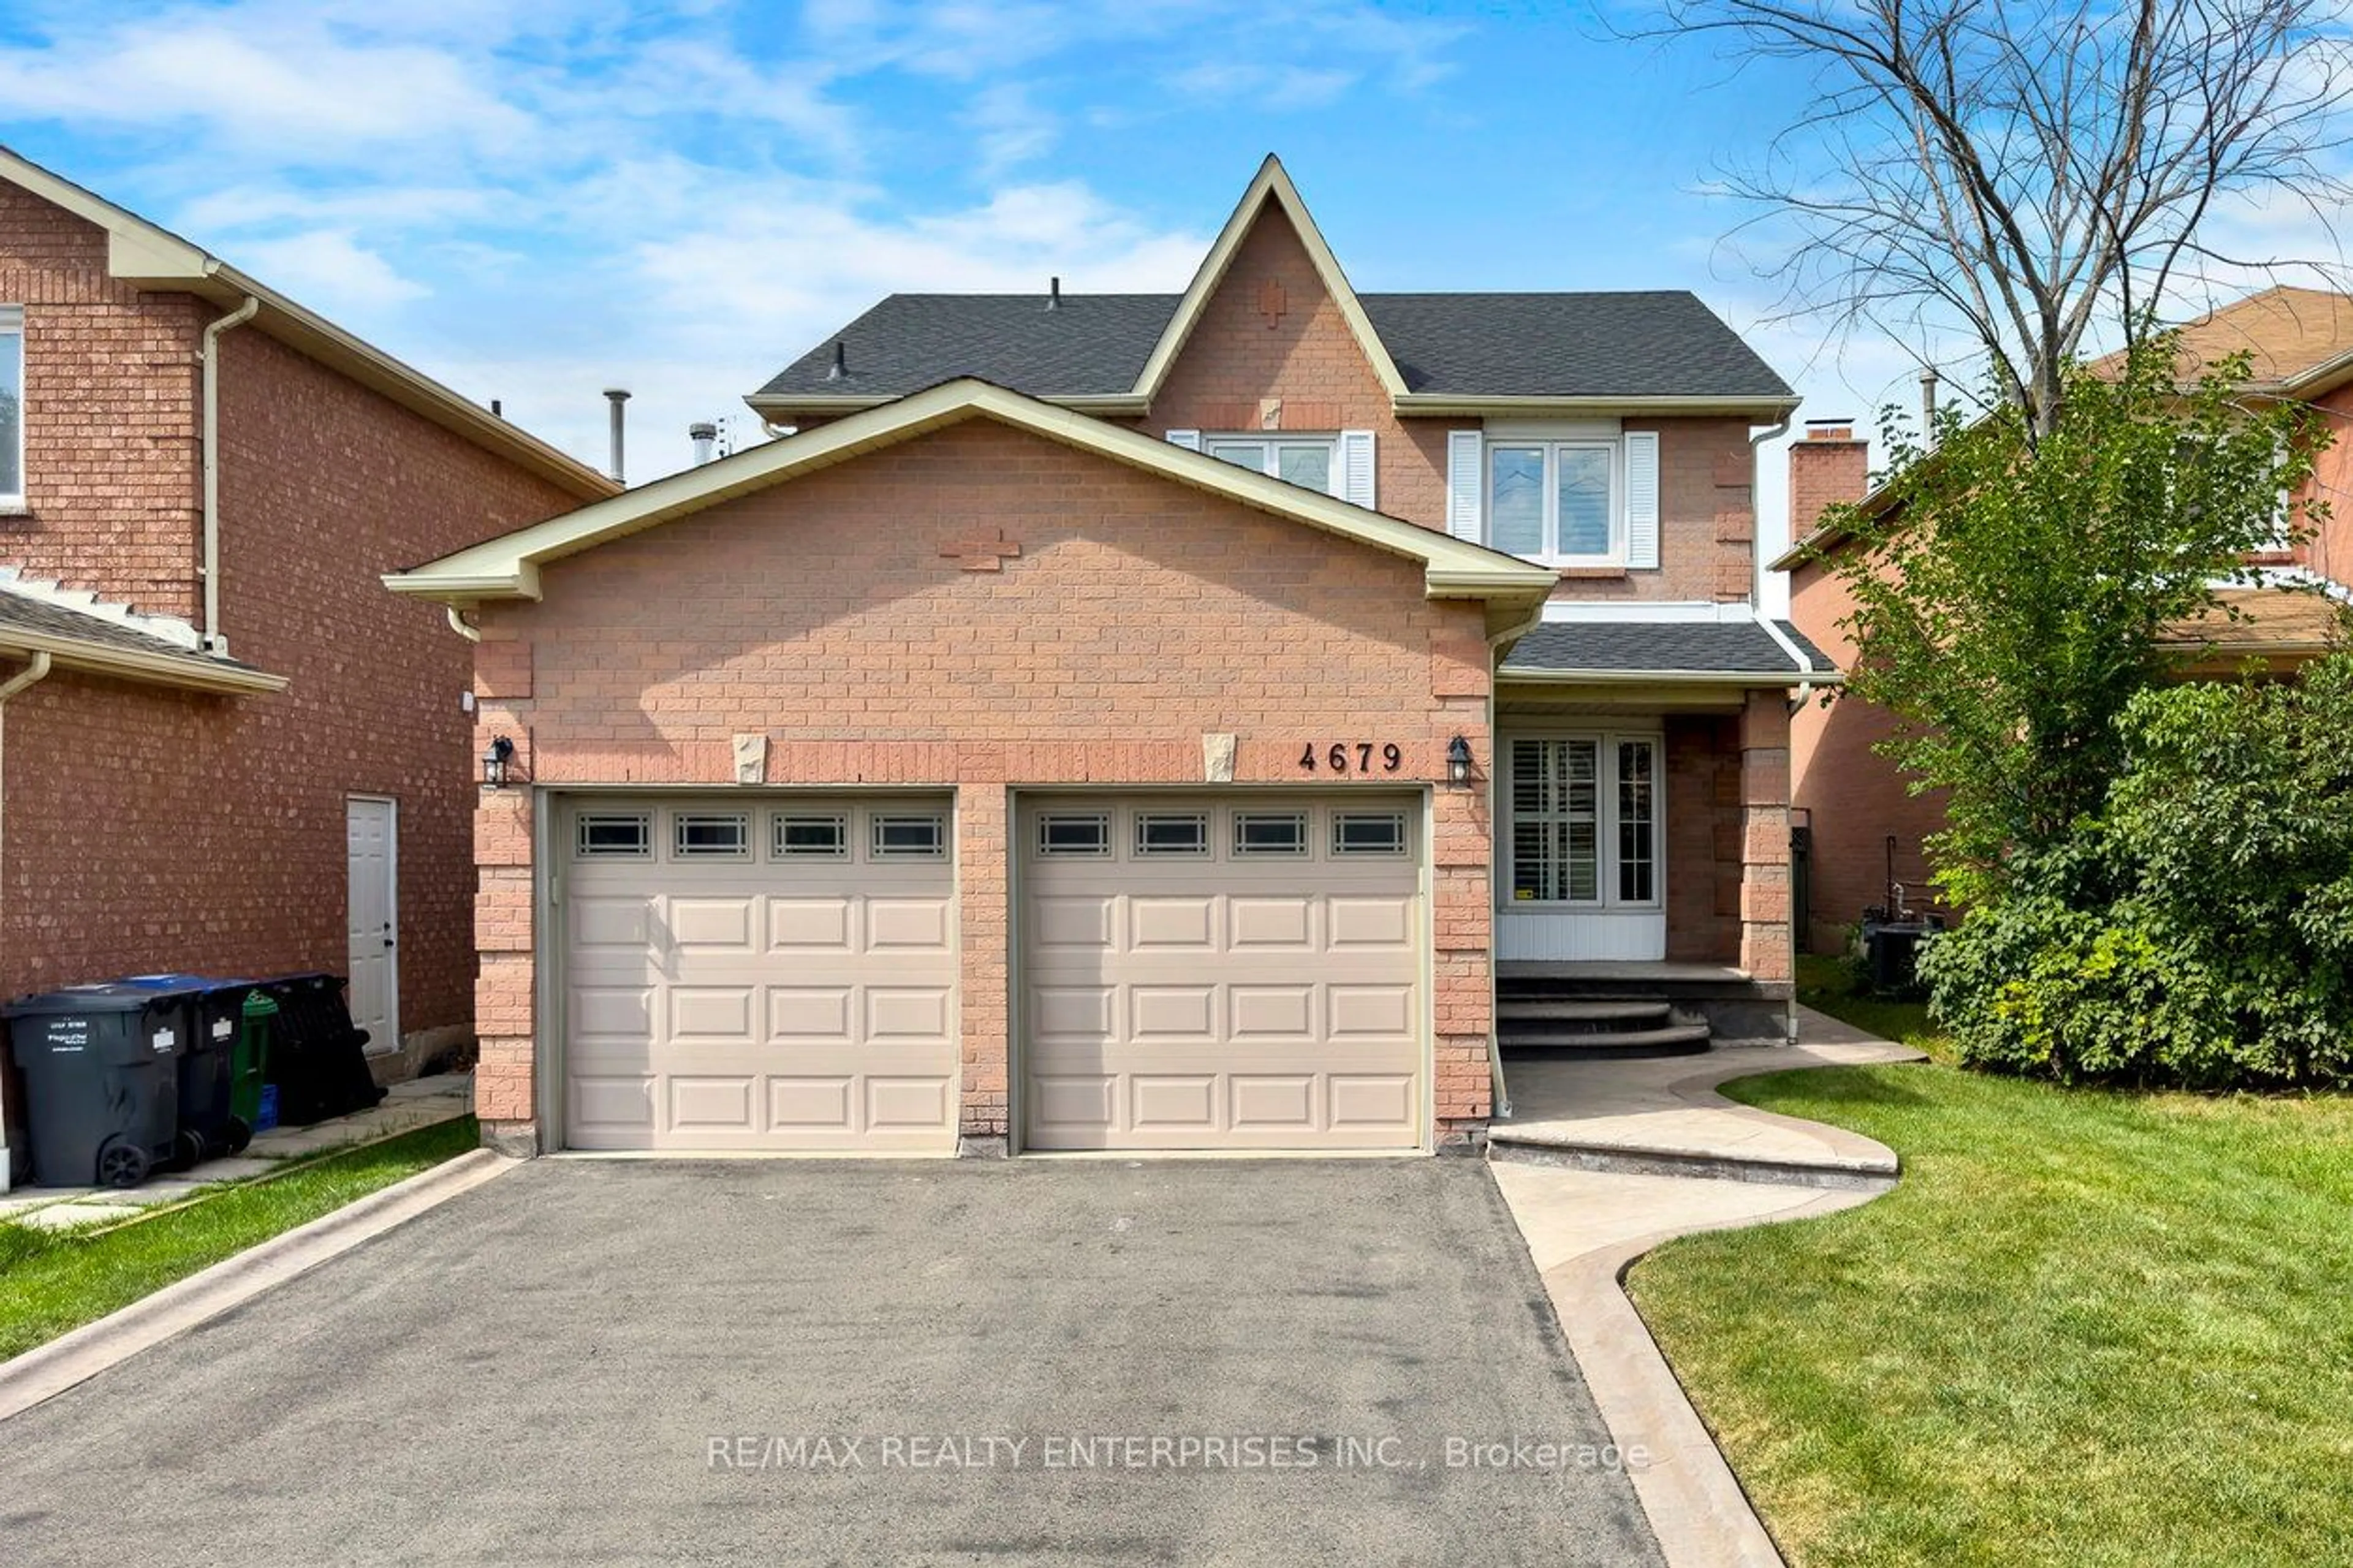 Home with brick exterior material for 4679 Rosebush Rd, Mississauga Ontario L5M 5H3